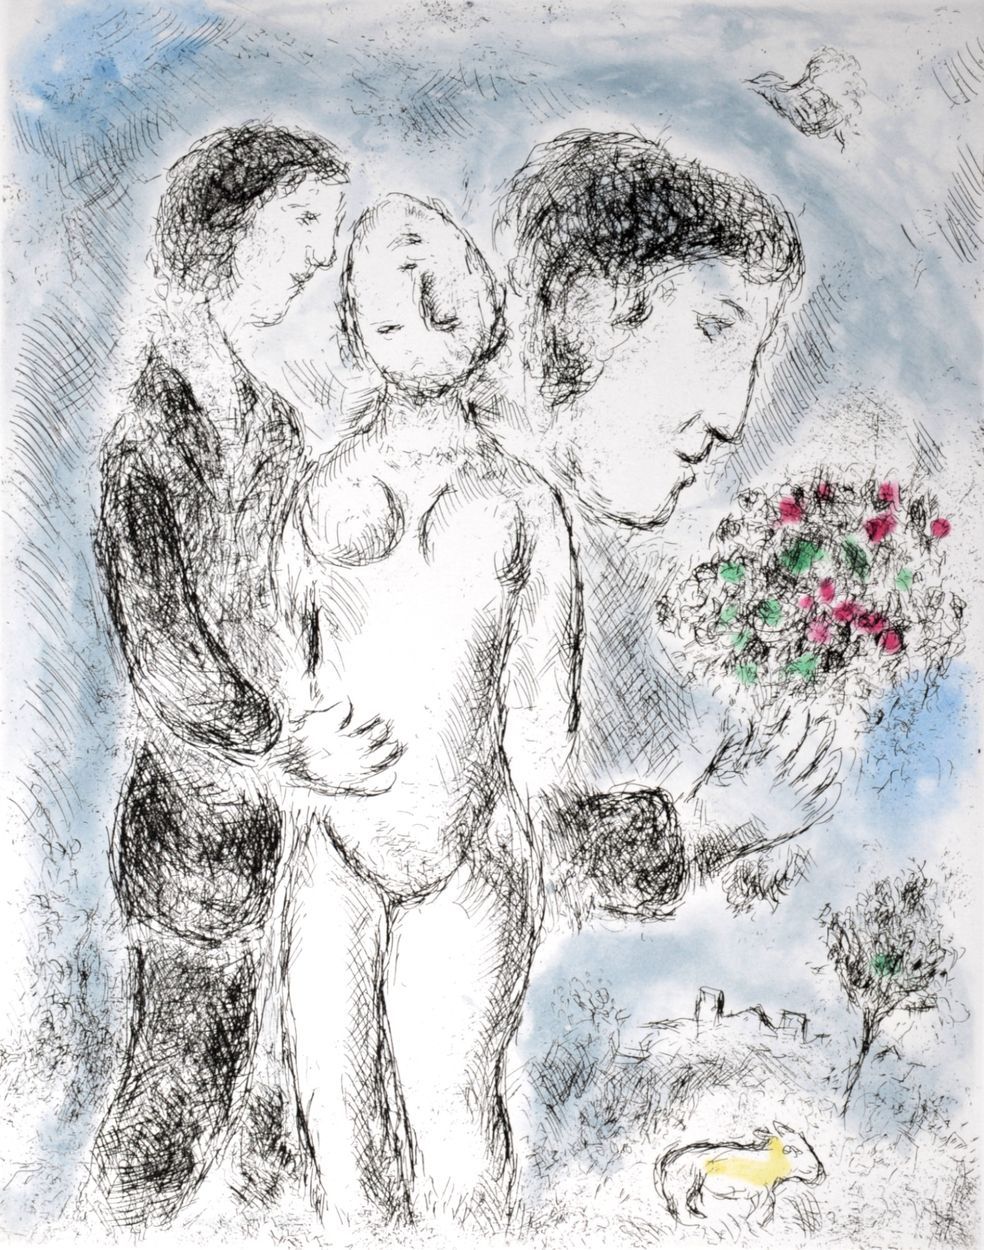 Marc Chagall Marc Chagall (1887-1985)

The one who says things without saying an&hellip;